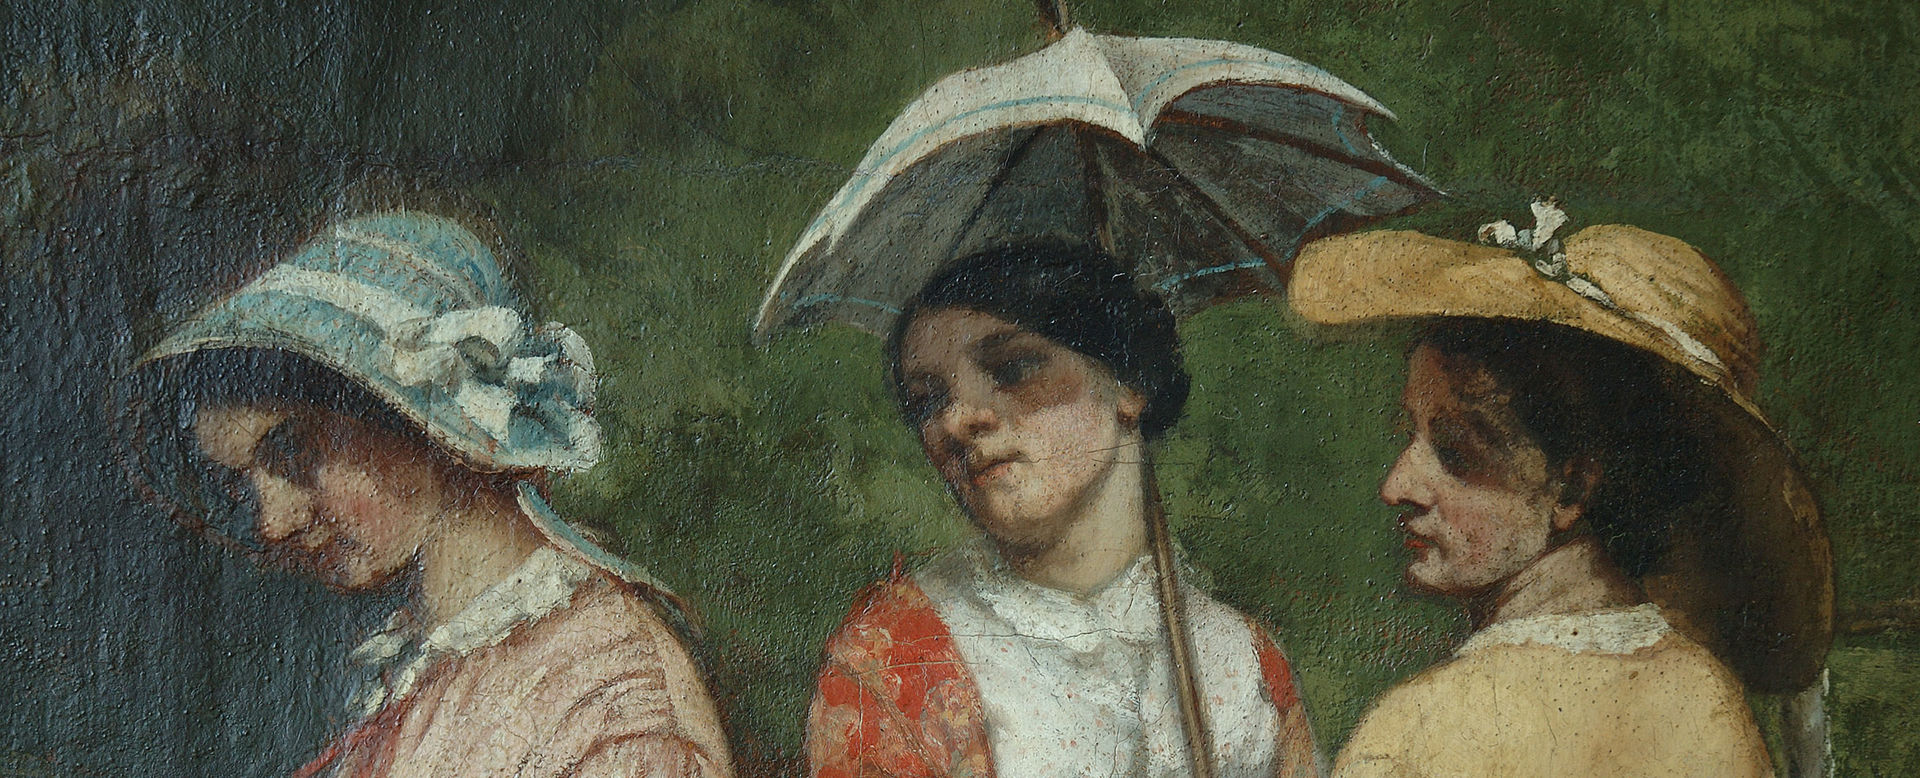 Detail of a painting by Gustave Courbet. The work was finished in 1852 and shows the artist’s three sisters strolling in a valley. They wear French country style dresses. The woman in the center holds a white parasol, while the others wear hats to protect them from the sun.